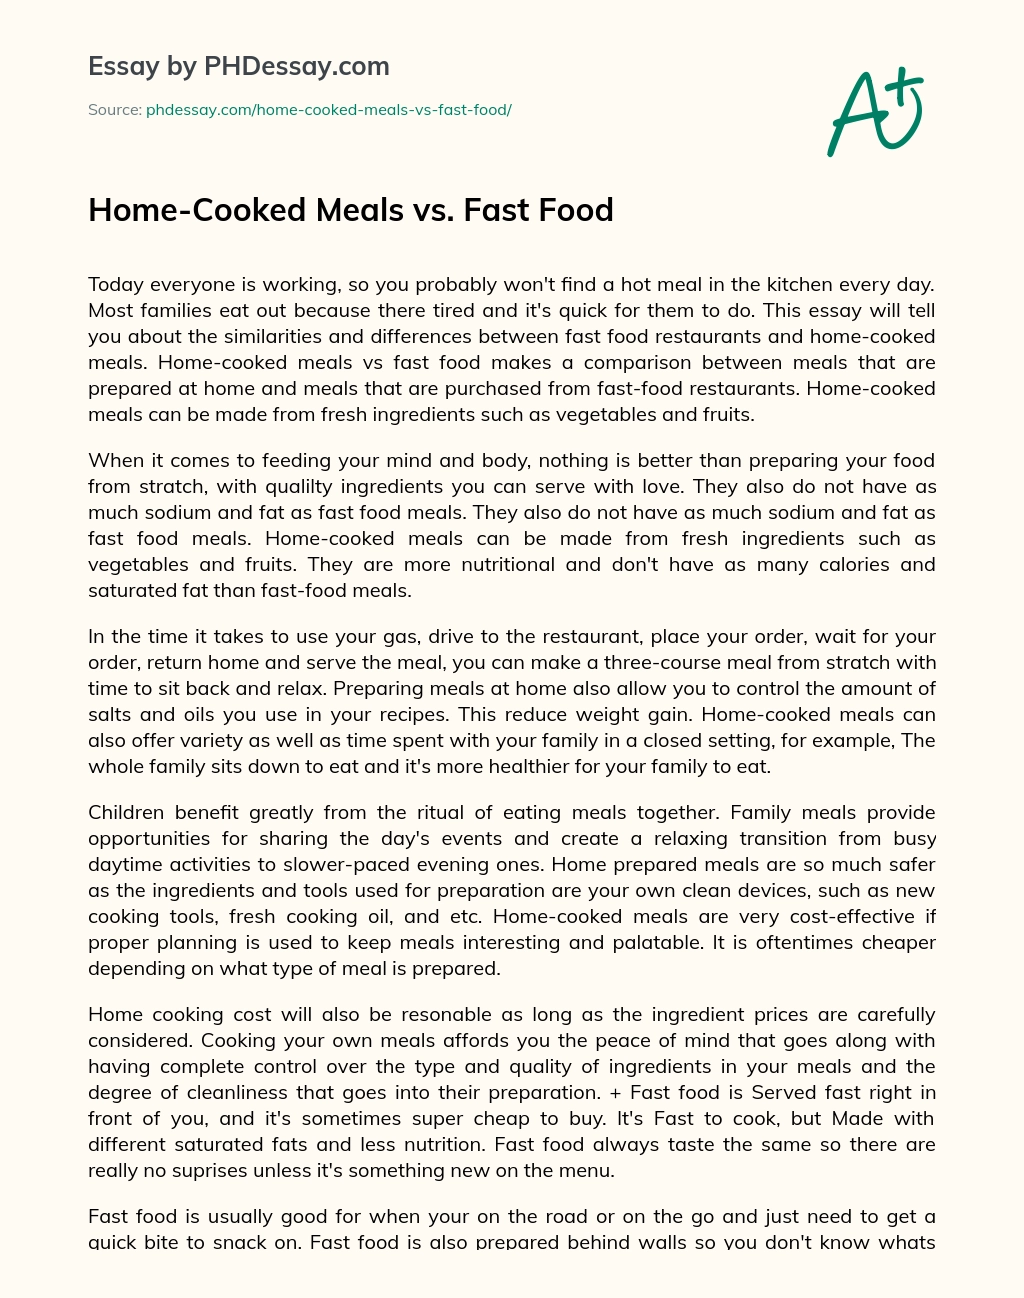 ﻿Home-Cooked Meals vs. Fast Food essay